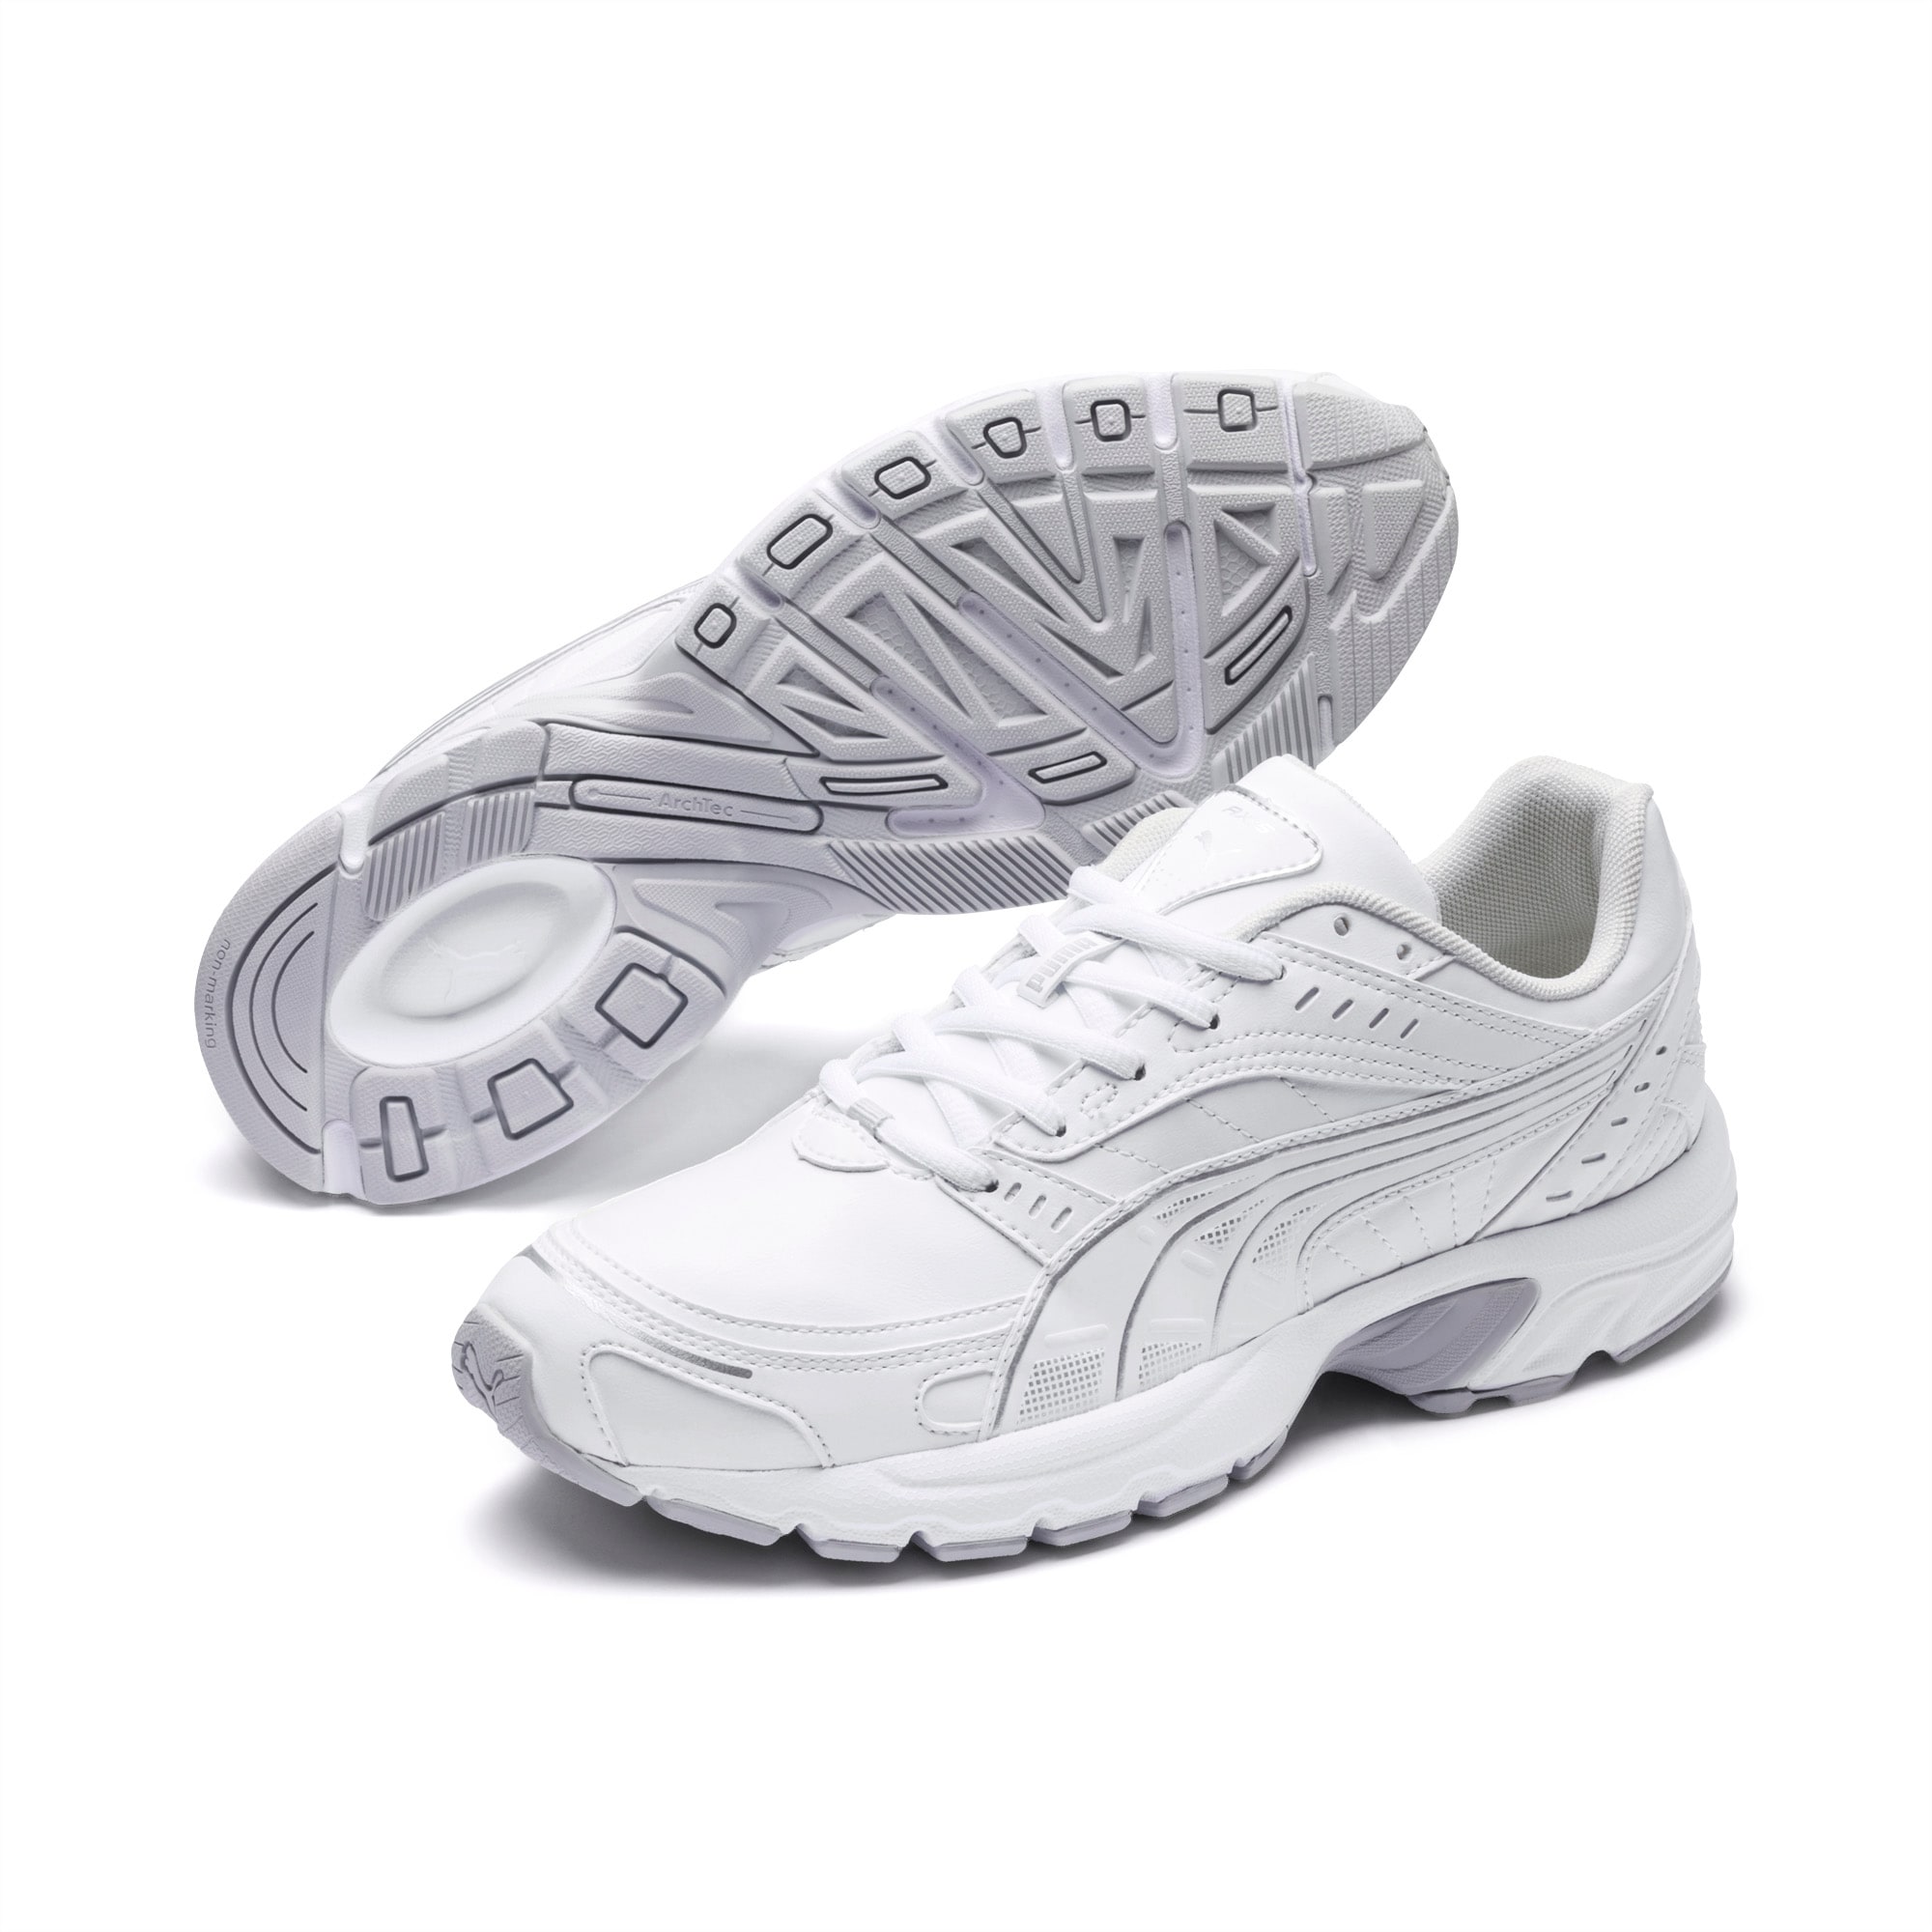 puma axis running shoes